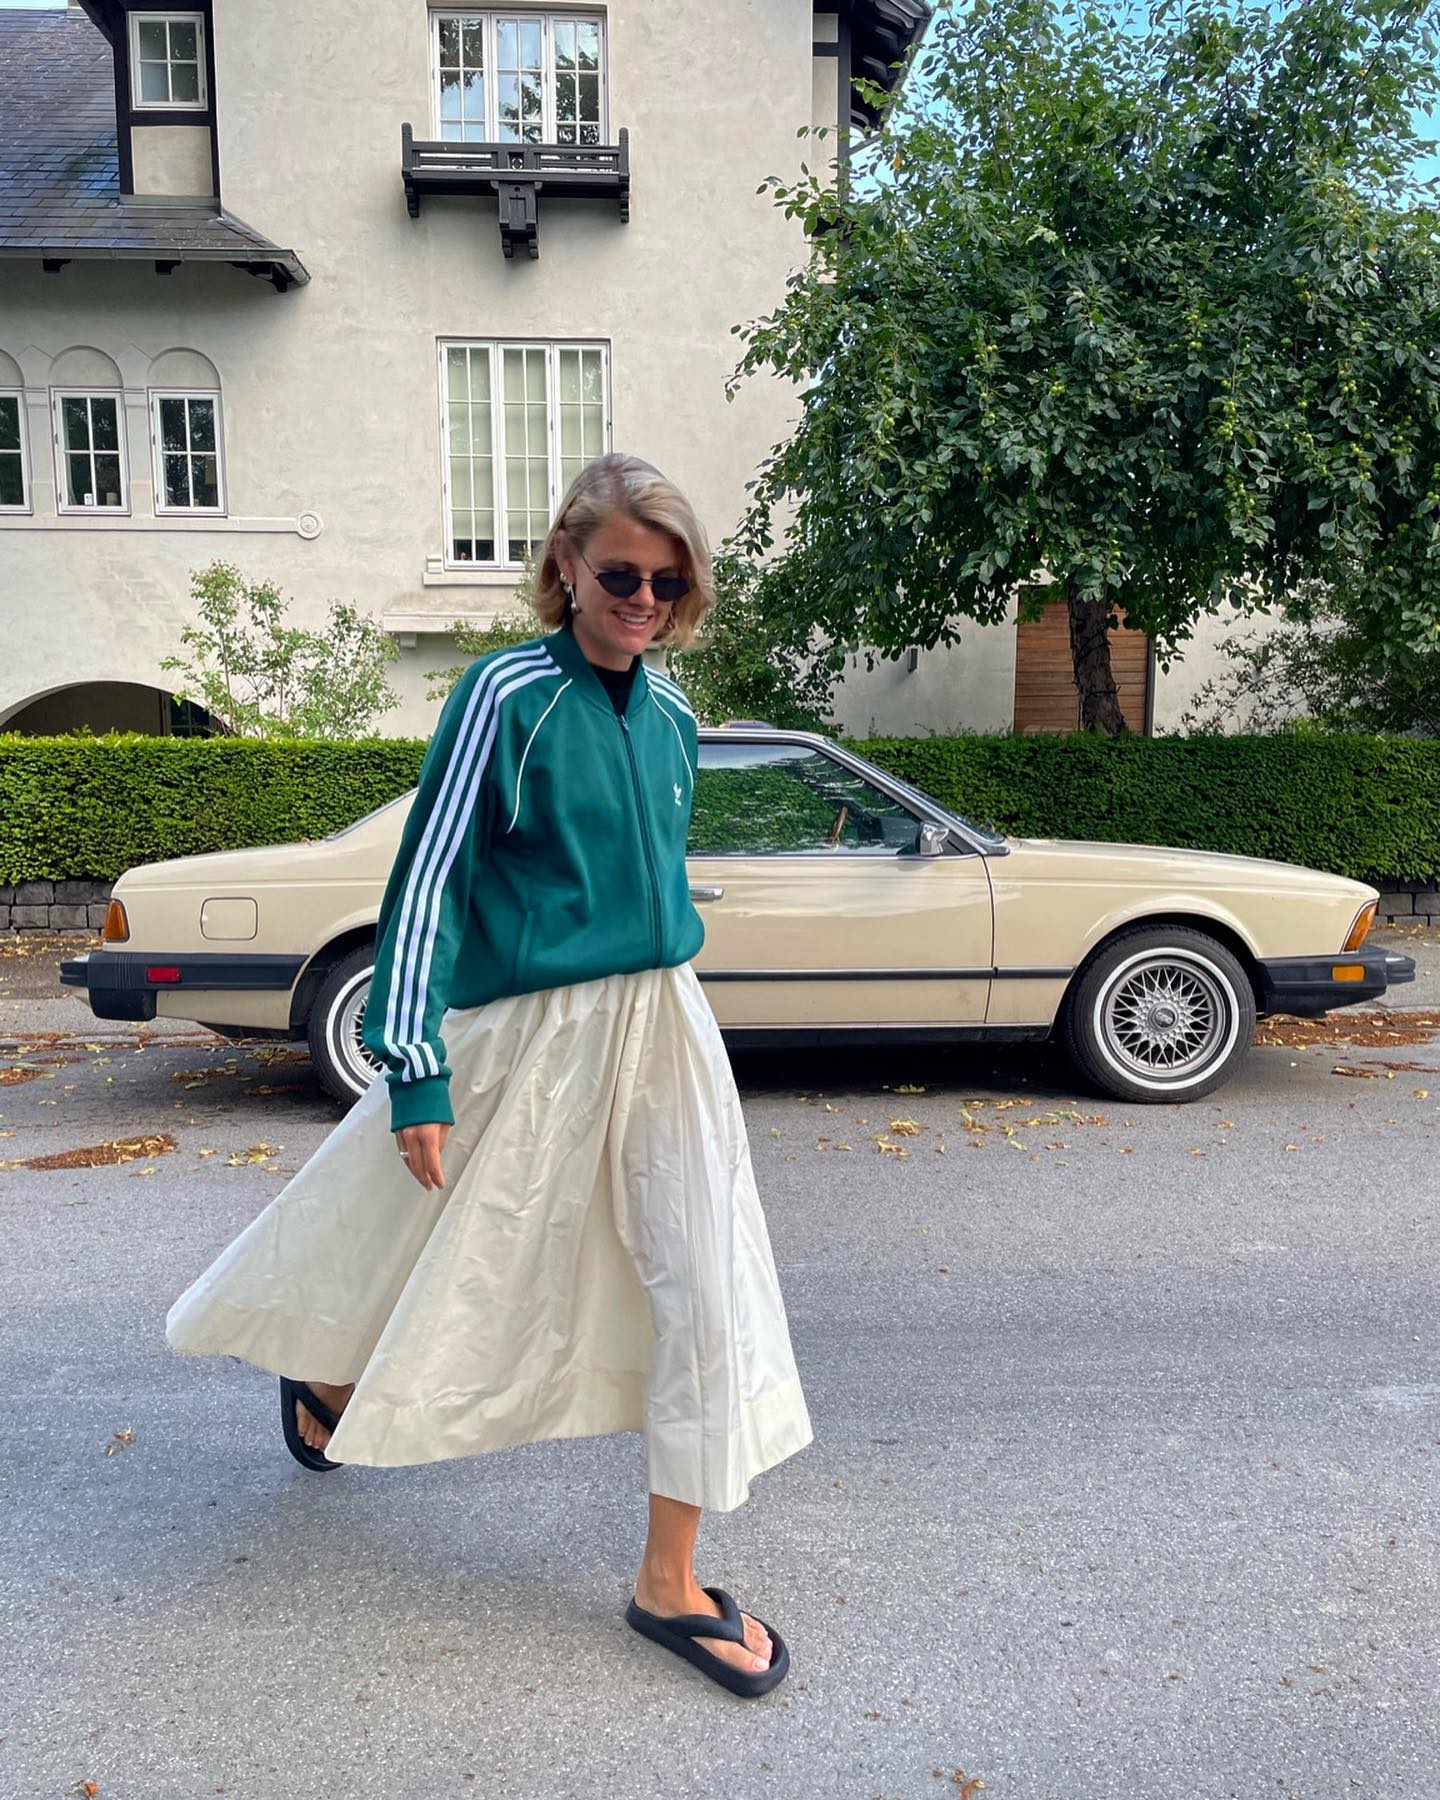 Scandi fashion influencer Amalie Neilsenn walks across a street in a sporty-chic outfit with a green Adidas zip-up jacket, full white skirt and platform flip-flop sandals